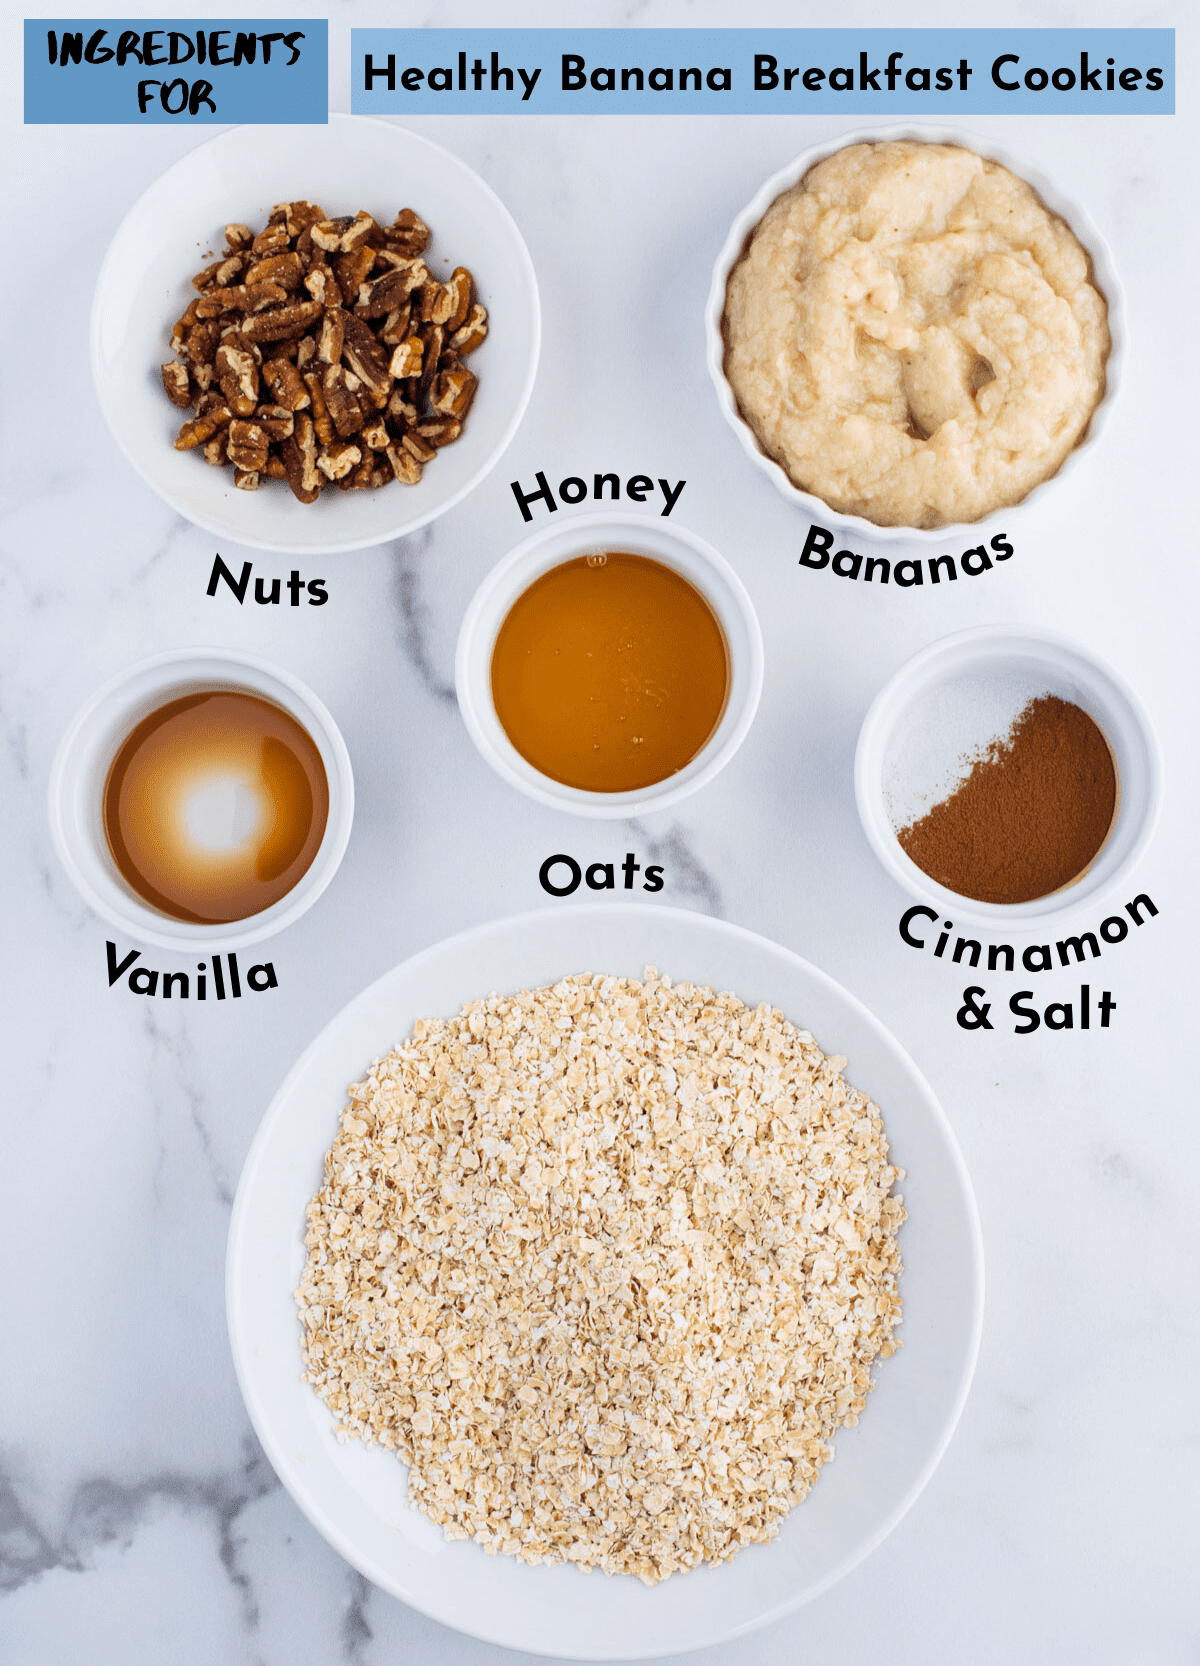 ingredients for healthy banana cookies in white containers with text overlay